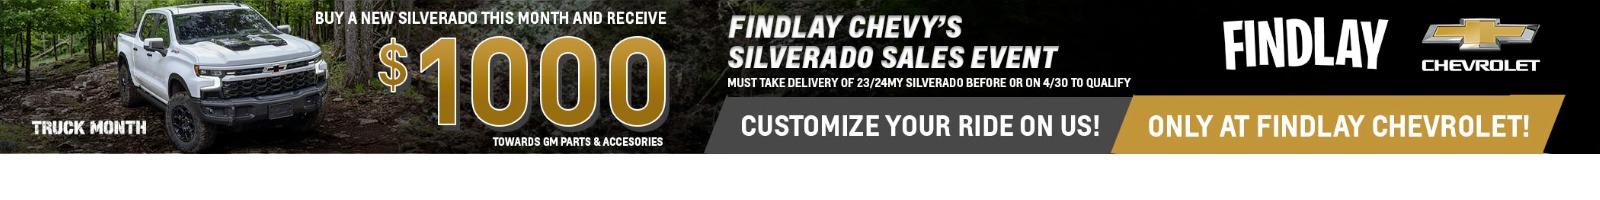 BUY A NEW SILVERADO THIS MONTH AND RECEIVE $1000 CUSTOMIZE YOUR RIDE ON US! ONLY AT FINDLAY CHEVROLET!